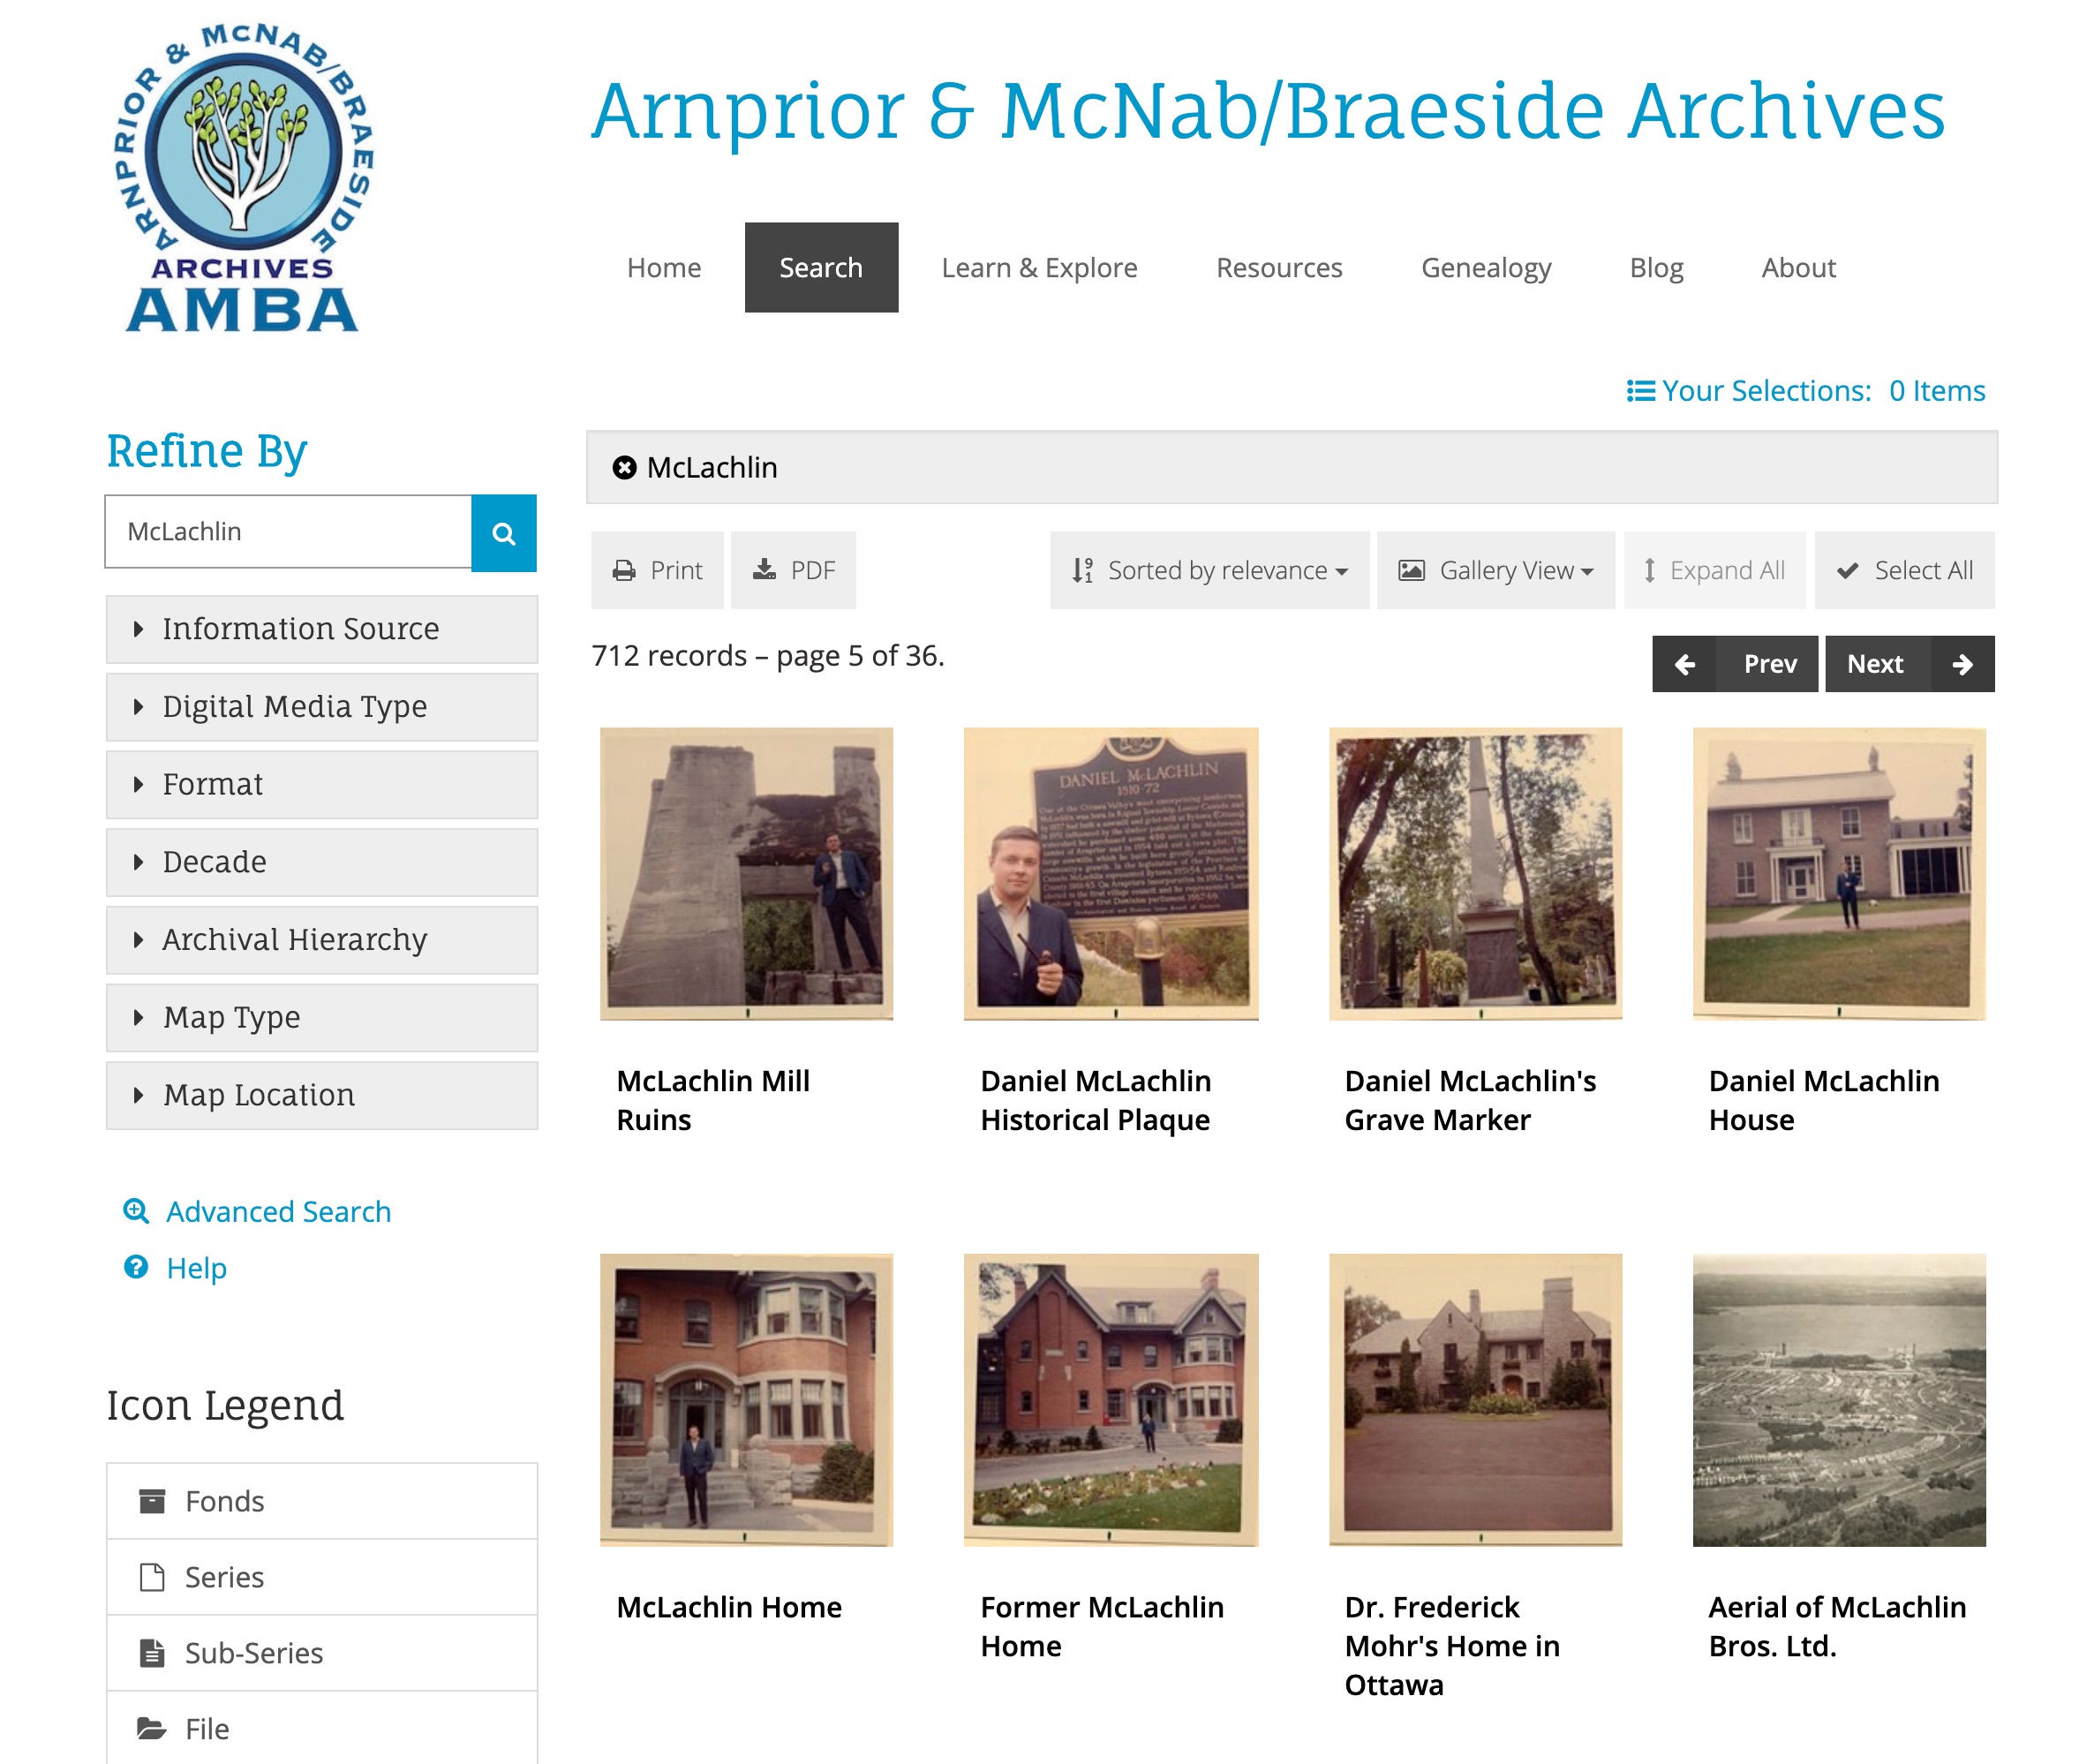 Arnprior and McNab/Braeside Archives